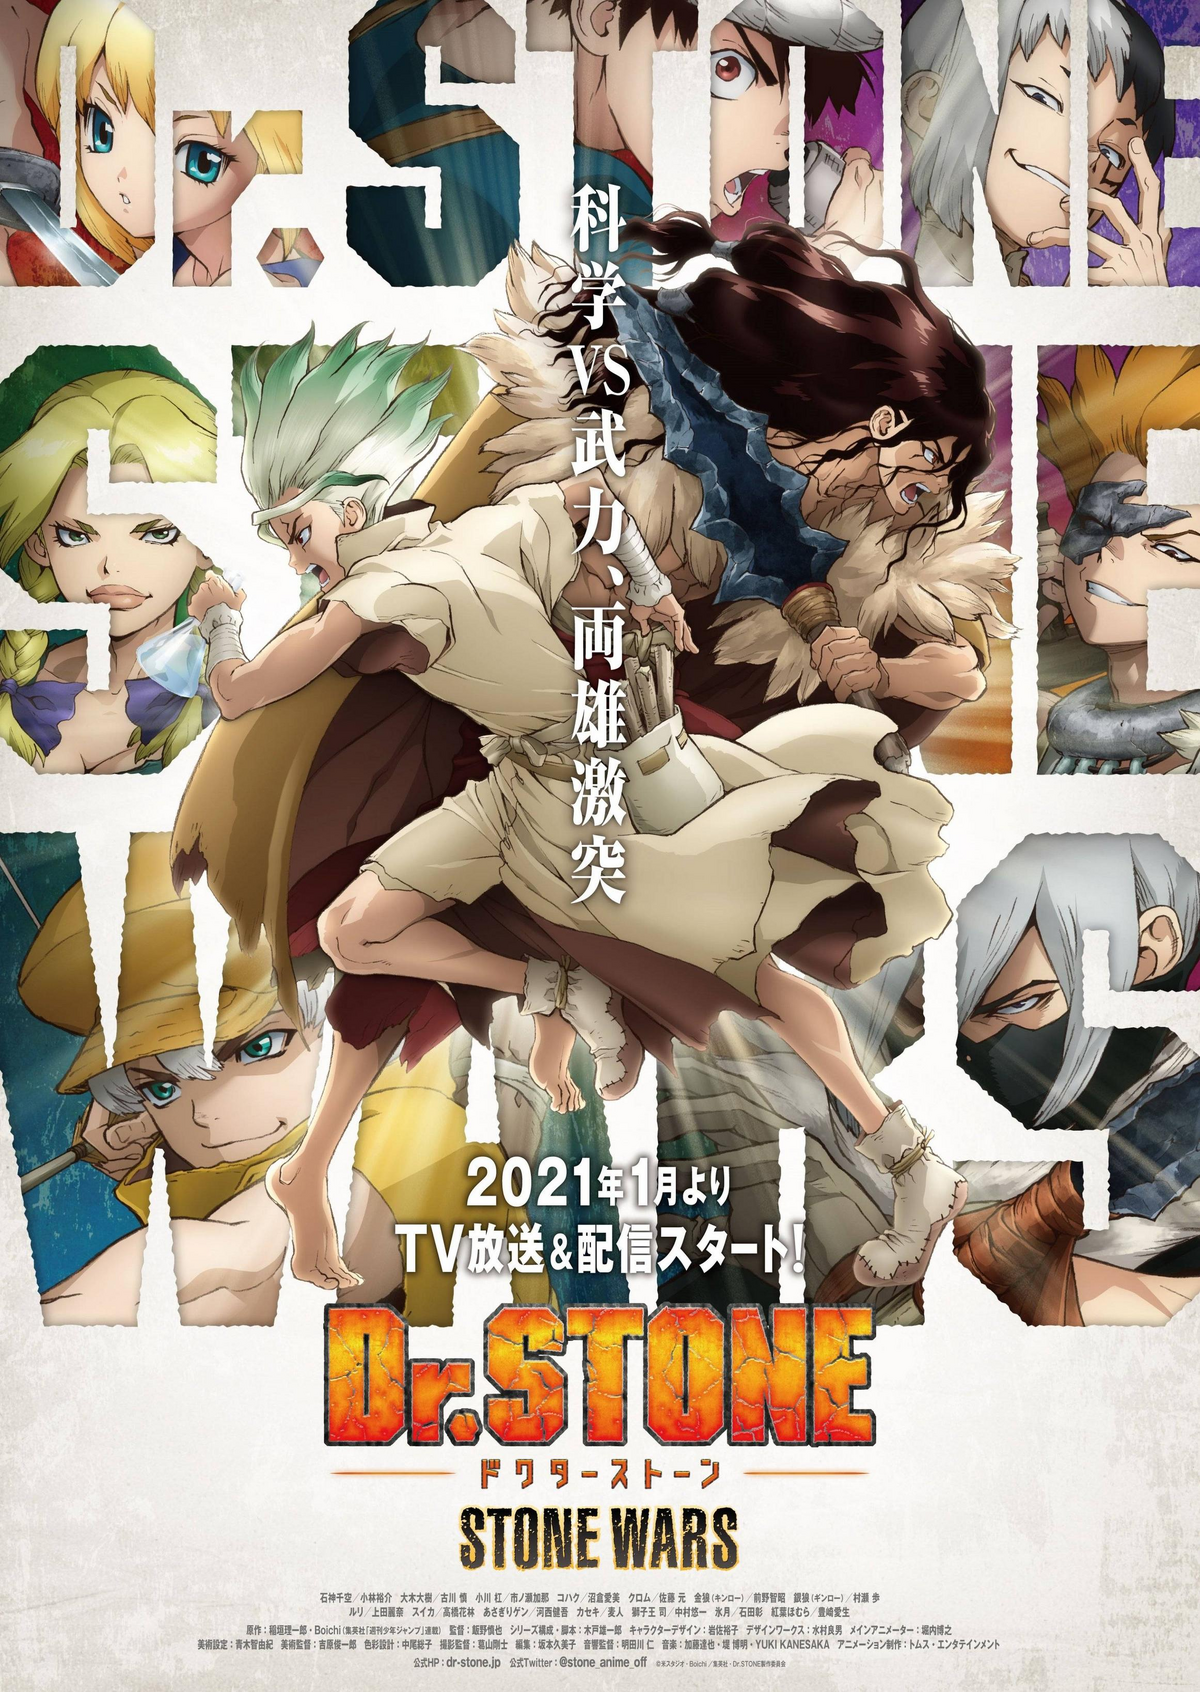 Dr. Stone Season 3 Episode 16: Spoilers from the manga, release